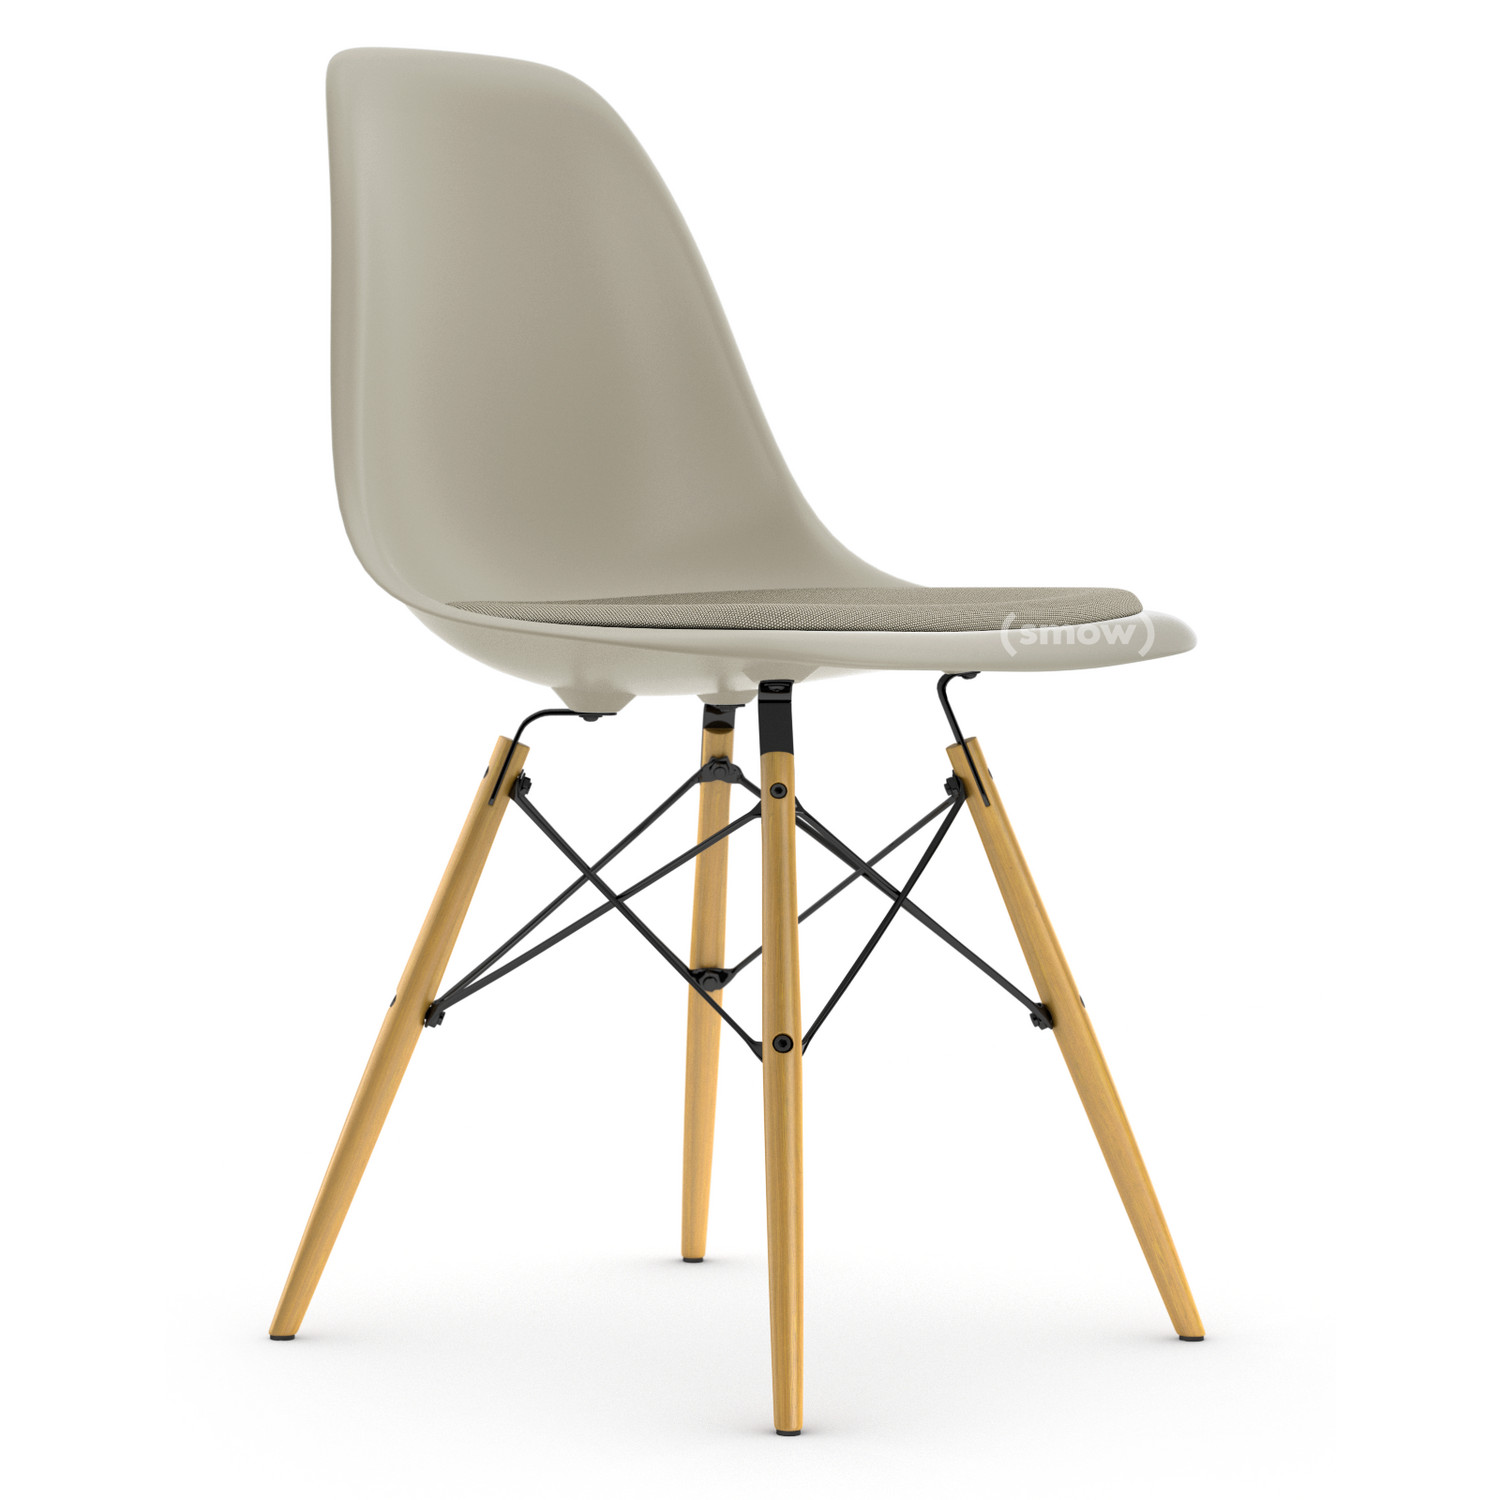 Kaliber op tijd Wegversperring Vitra Eames Plastic Side Chair DSW, Pebble, With seat upholstery, Warm grey  / ivory, Standard version - 43 cm, Ash honey tone by Charles & Ray Eames,  1950 - Designer furniture by smow.com